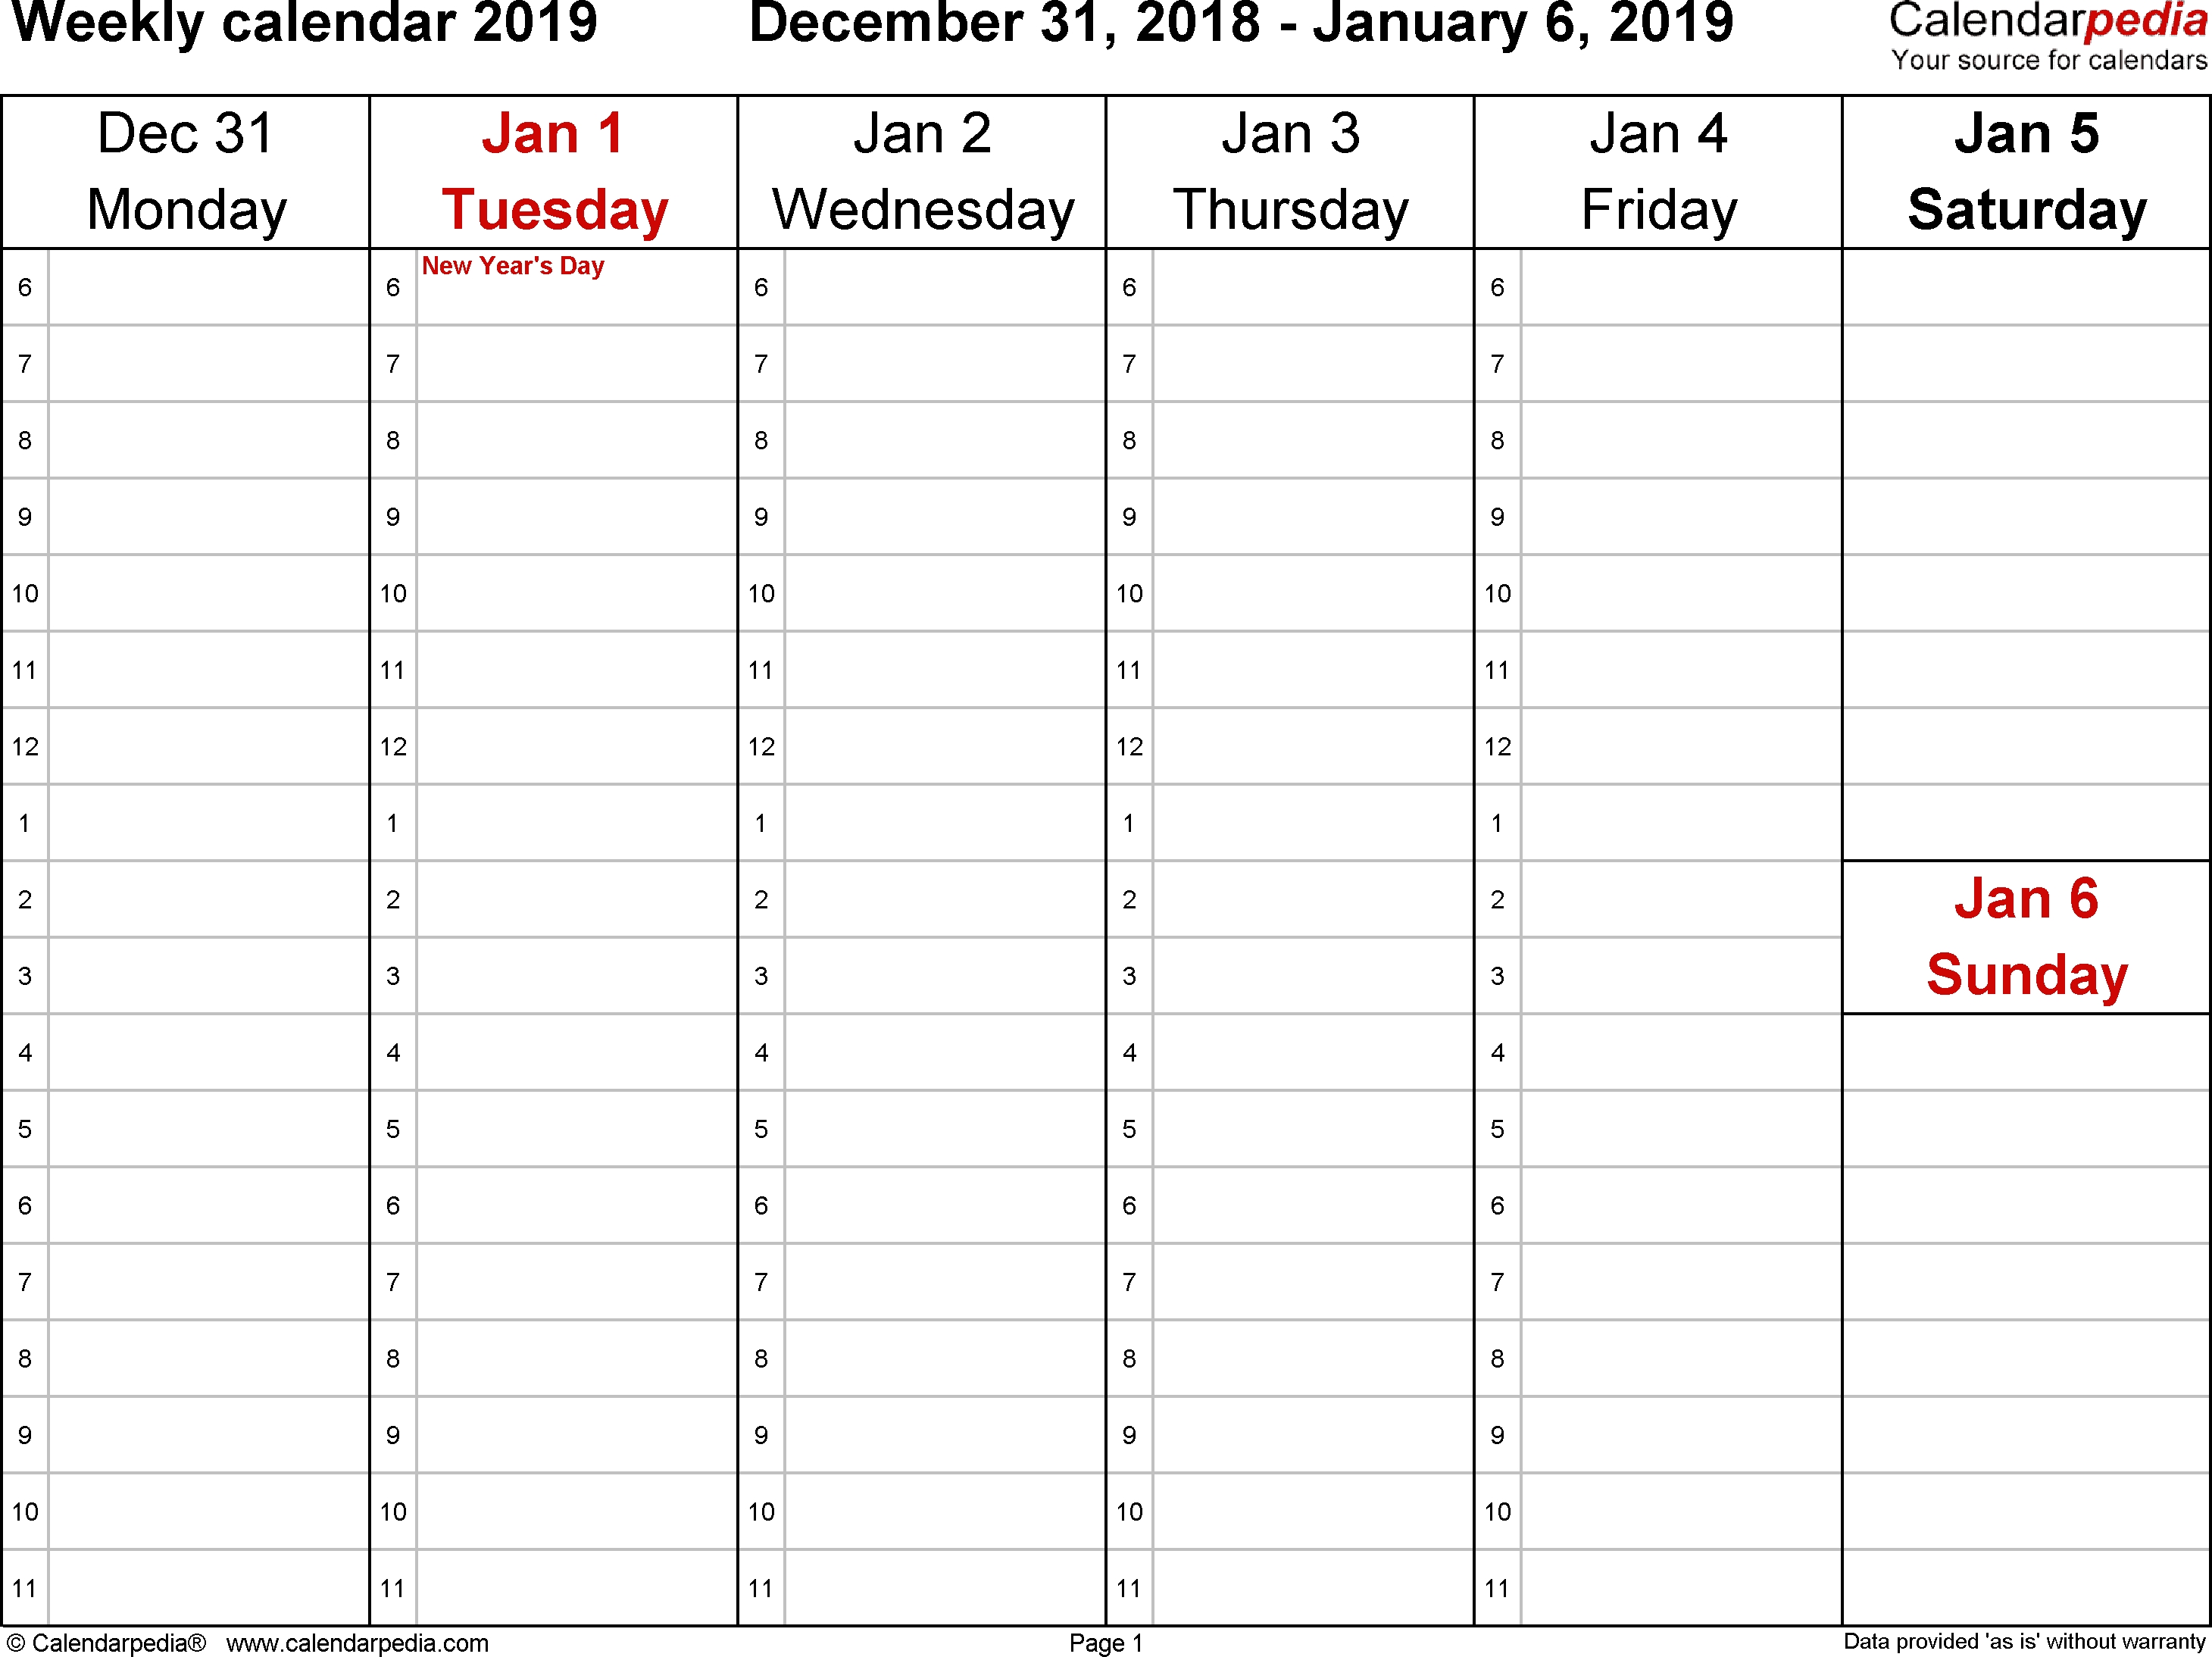 Weekly Calendars 2019 For Word - 12 Free Printable Templates-Downloadable Monday Thru Friday Calendar Template